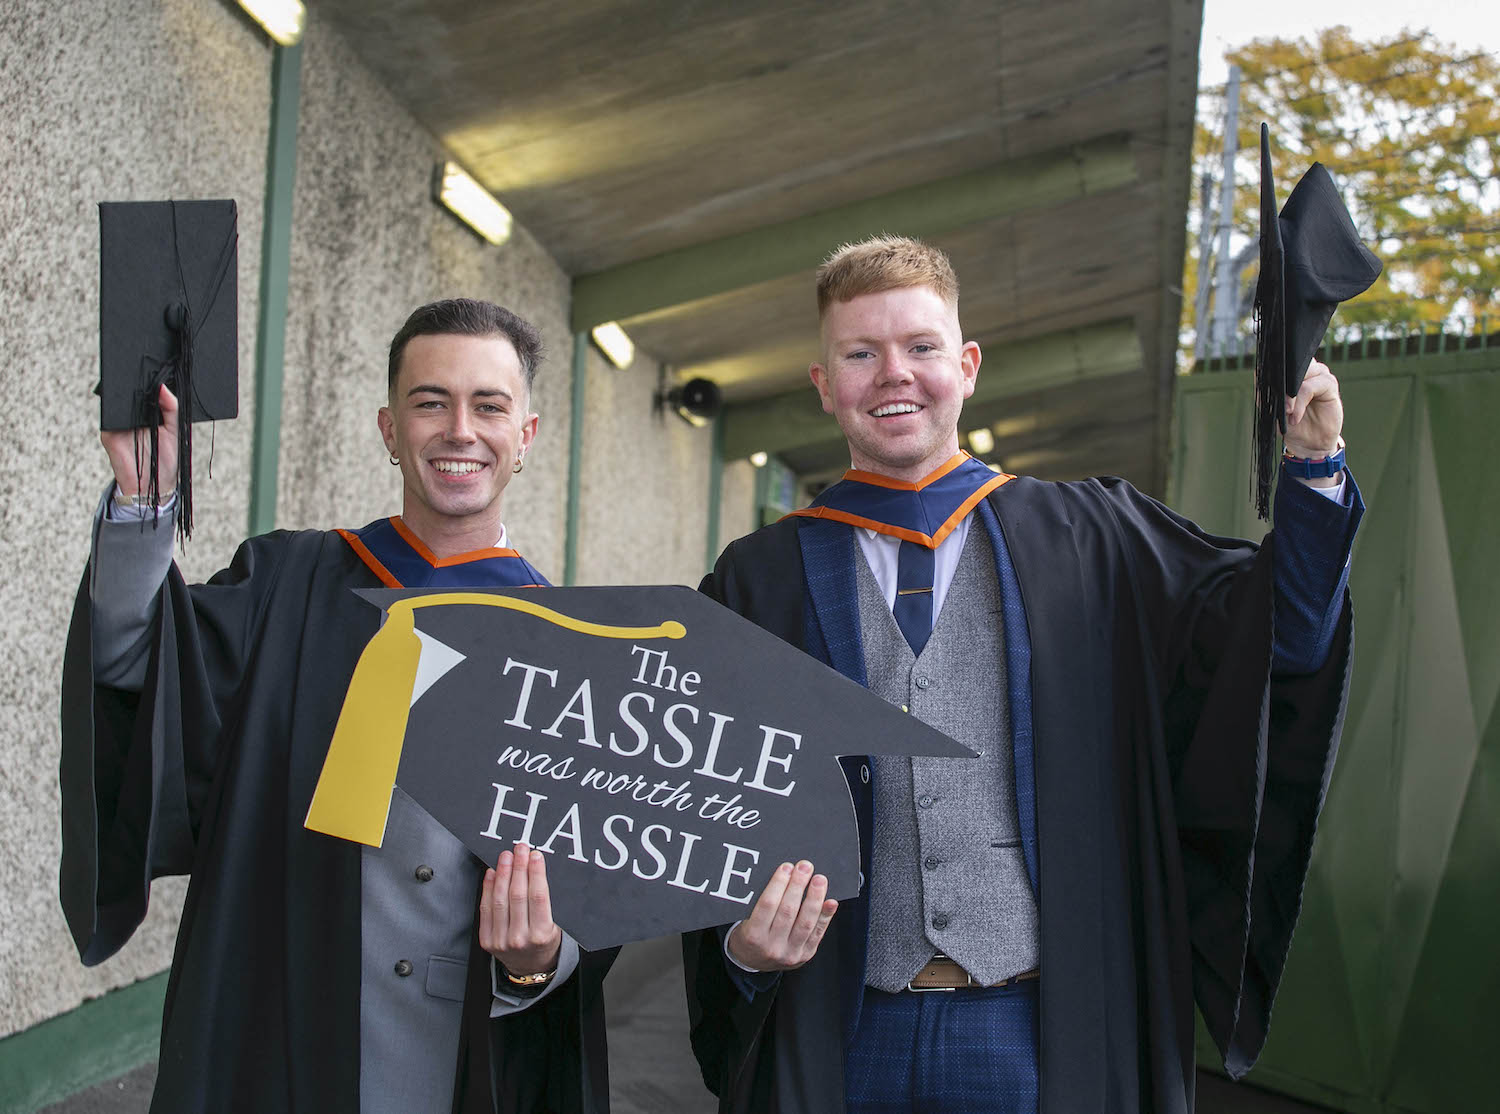 TUS graduates - Pictured ahead of the first Graduation ceremony were Dylan Cotter, St Mary's Park Limerick and Ian O'Sullivan, Ballylanders Co Limerick, Civil Engineering. Picture: Arthur Ellis